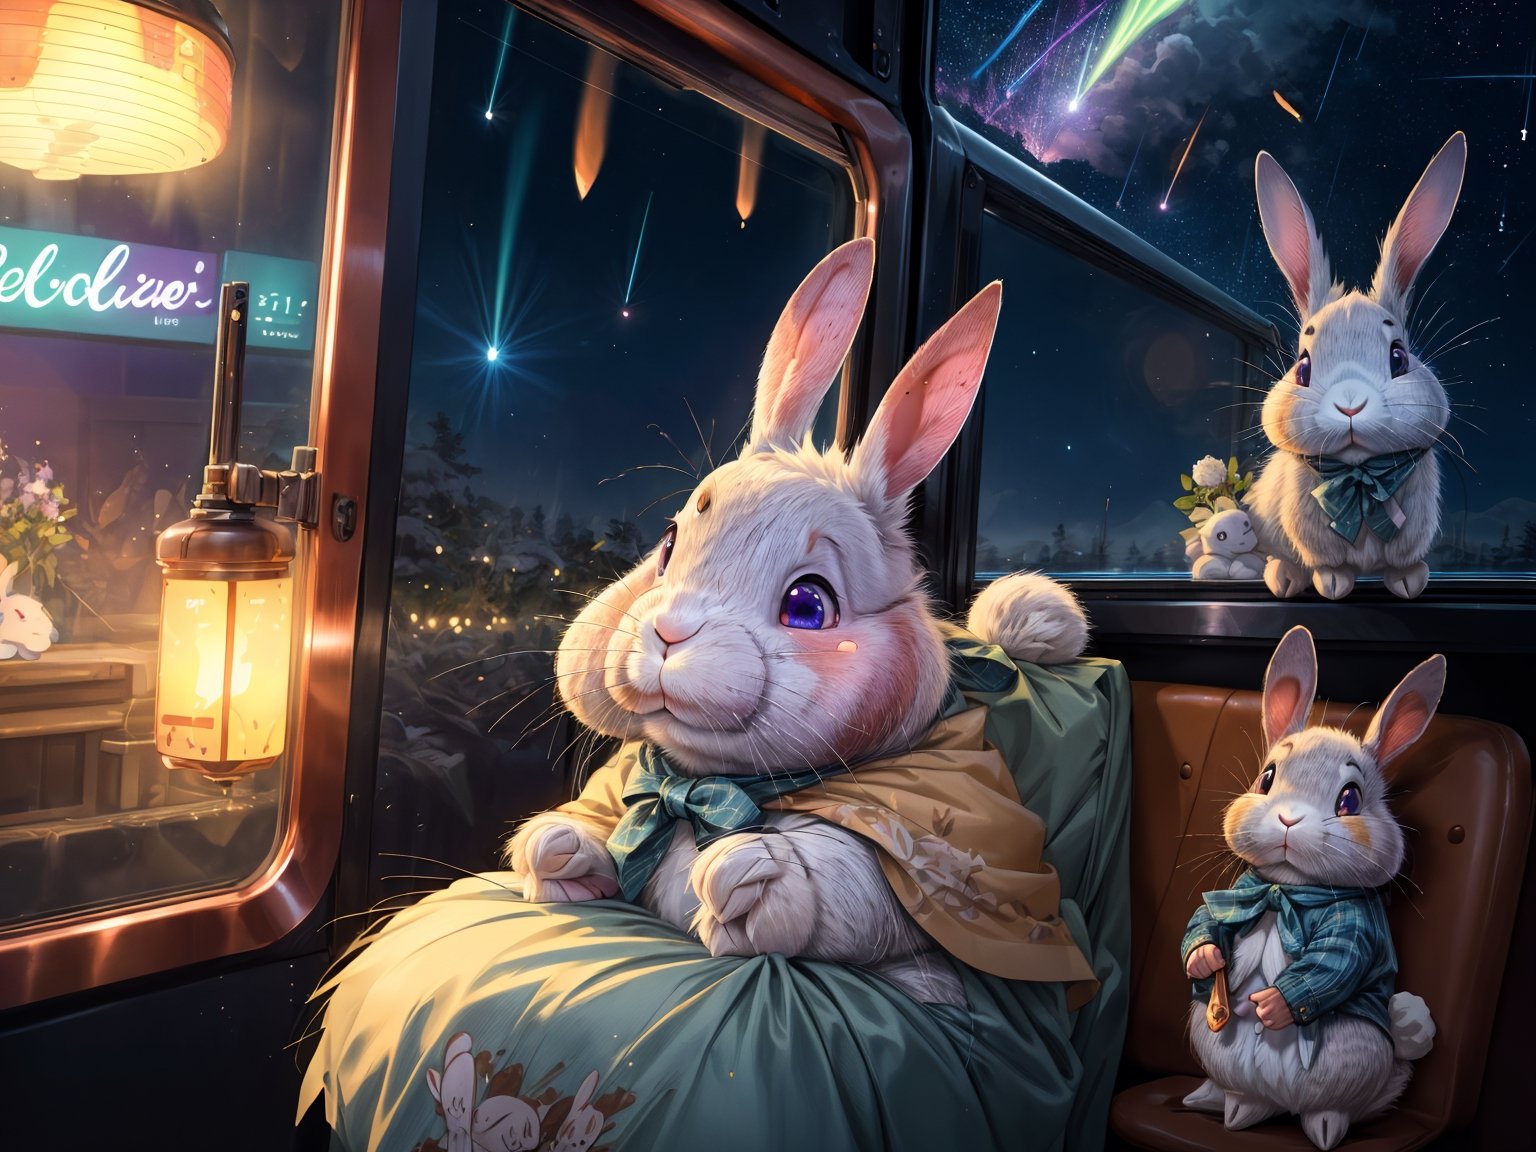 (Epic:1.4),  (A lot of rabbits:1.6),  Being on the train)),  traveling a long distance from the city,  waving goodbye,  saying goodbye,  hugging each other,  Many rabbits appeared from the train window. Waving a handkerchief,  Hands wipe away tears,  Smile with tears,  The atmosphere is full of emotions. (Meteor shower:1.4),  semi realistic hyper detailed,  awesome quality,  ultra-high res,  (photorealistic:1.4),  Masterpiece,  Concept Art,  perfect animal,  colorful wear,  bright light reflecting,  intricate details,  sharp focus,  natural lighting,  perfect shadow,  realistic,  16K,  UHD,  artstation,  pixiv,  CGI art,  extremely detailed cg,  quality,  gorgeous light and shadow,  highres,  (absurdres:1.2),  ultra high res,  high quality,  sparkling eyes,  stunning light,  gorgeous scenes,  ultra detailed,  brilliant color,  Illustrate,  starry sky Shining brightly It was a night so beautiful it was awe-inspiring,  celebrating,  in a wintery scene pink purple blue green northern lights,  trending on artstation,  kawaii,  sharp focus,  Photorealistic Images,  (extra wide shot:1.4),  dynamic lighting,  vivid colors,  texture detail,  particle effects,  storytelling elements,  narrative flair,  hyper (anime illustration:1.4),  character,  dynamic angle, no human, ((with text as "Good Bye 2023" , brush style , copper style )) 